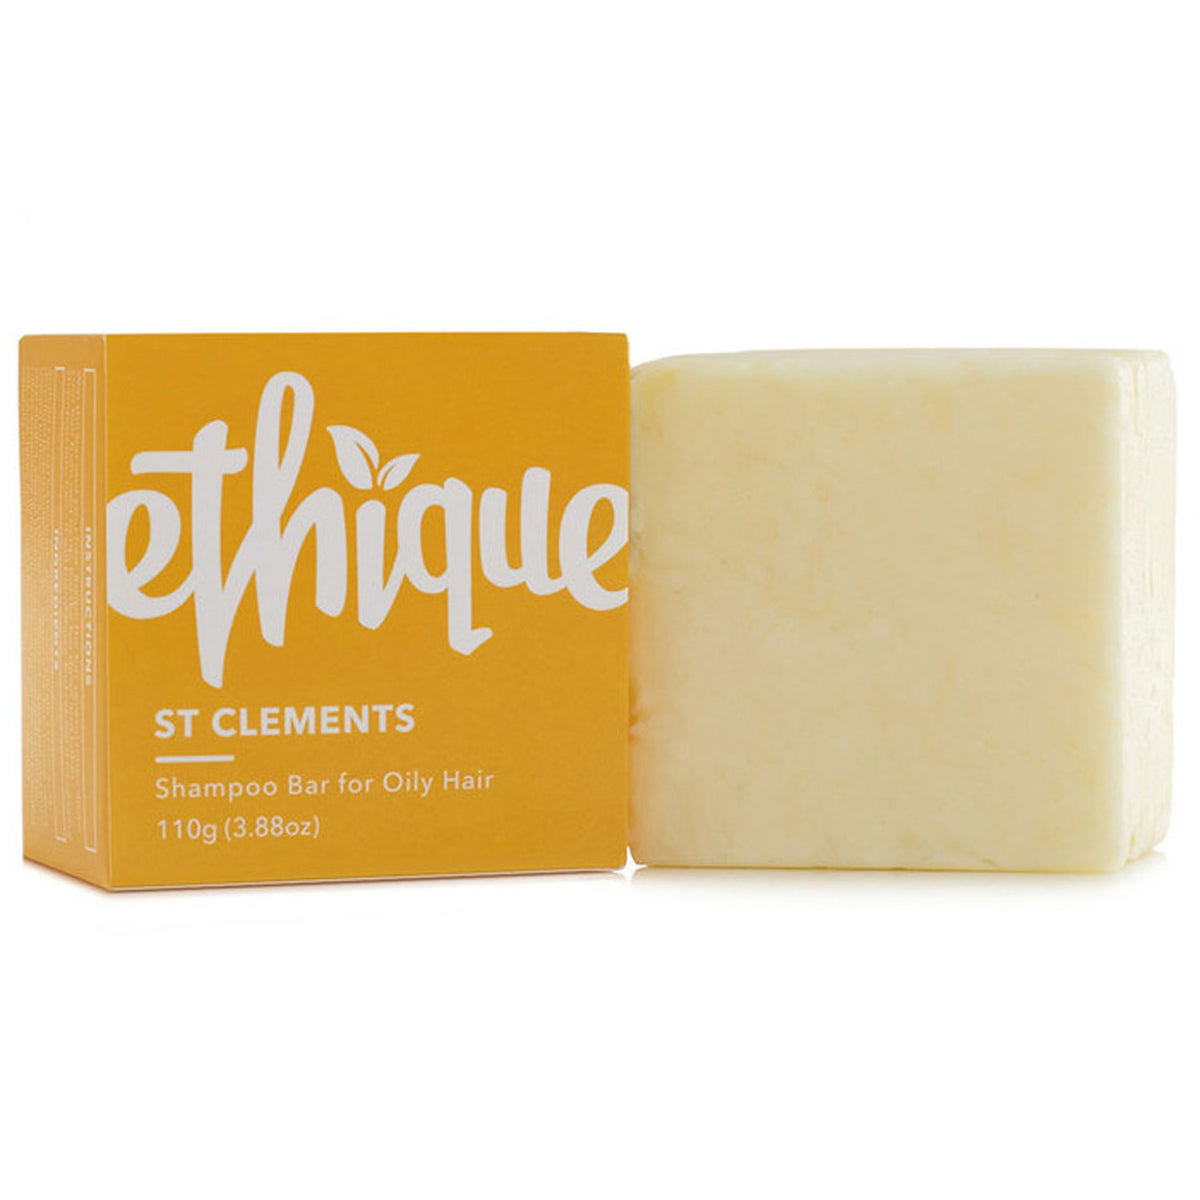 Ethique St Clements Shampoo Bar For Oily Hair 110g - Orcadia